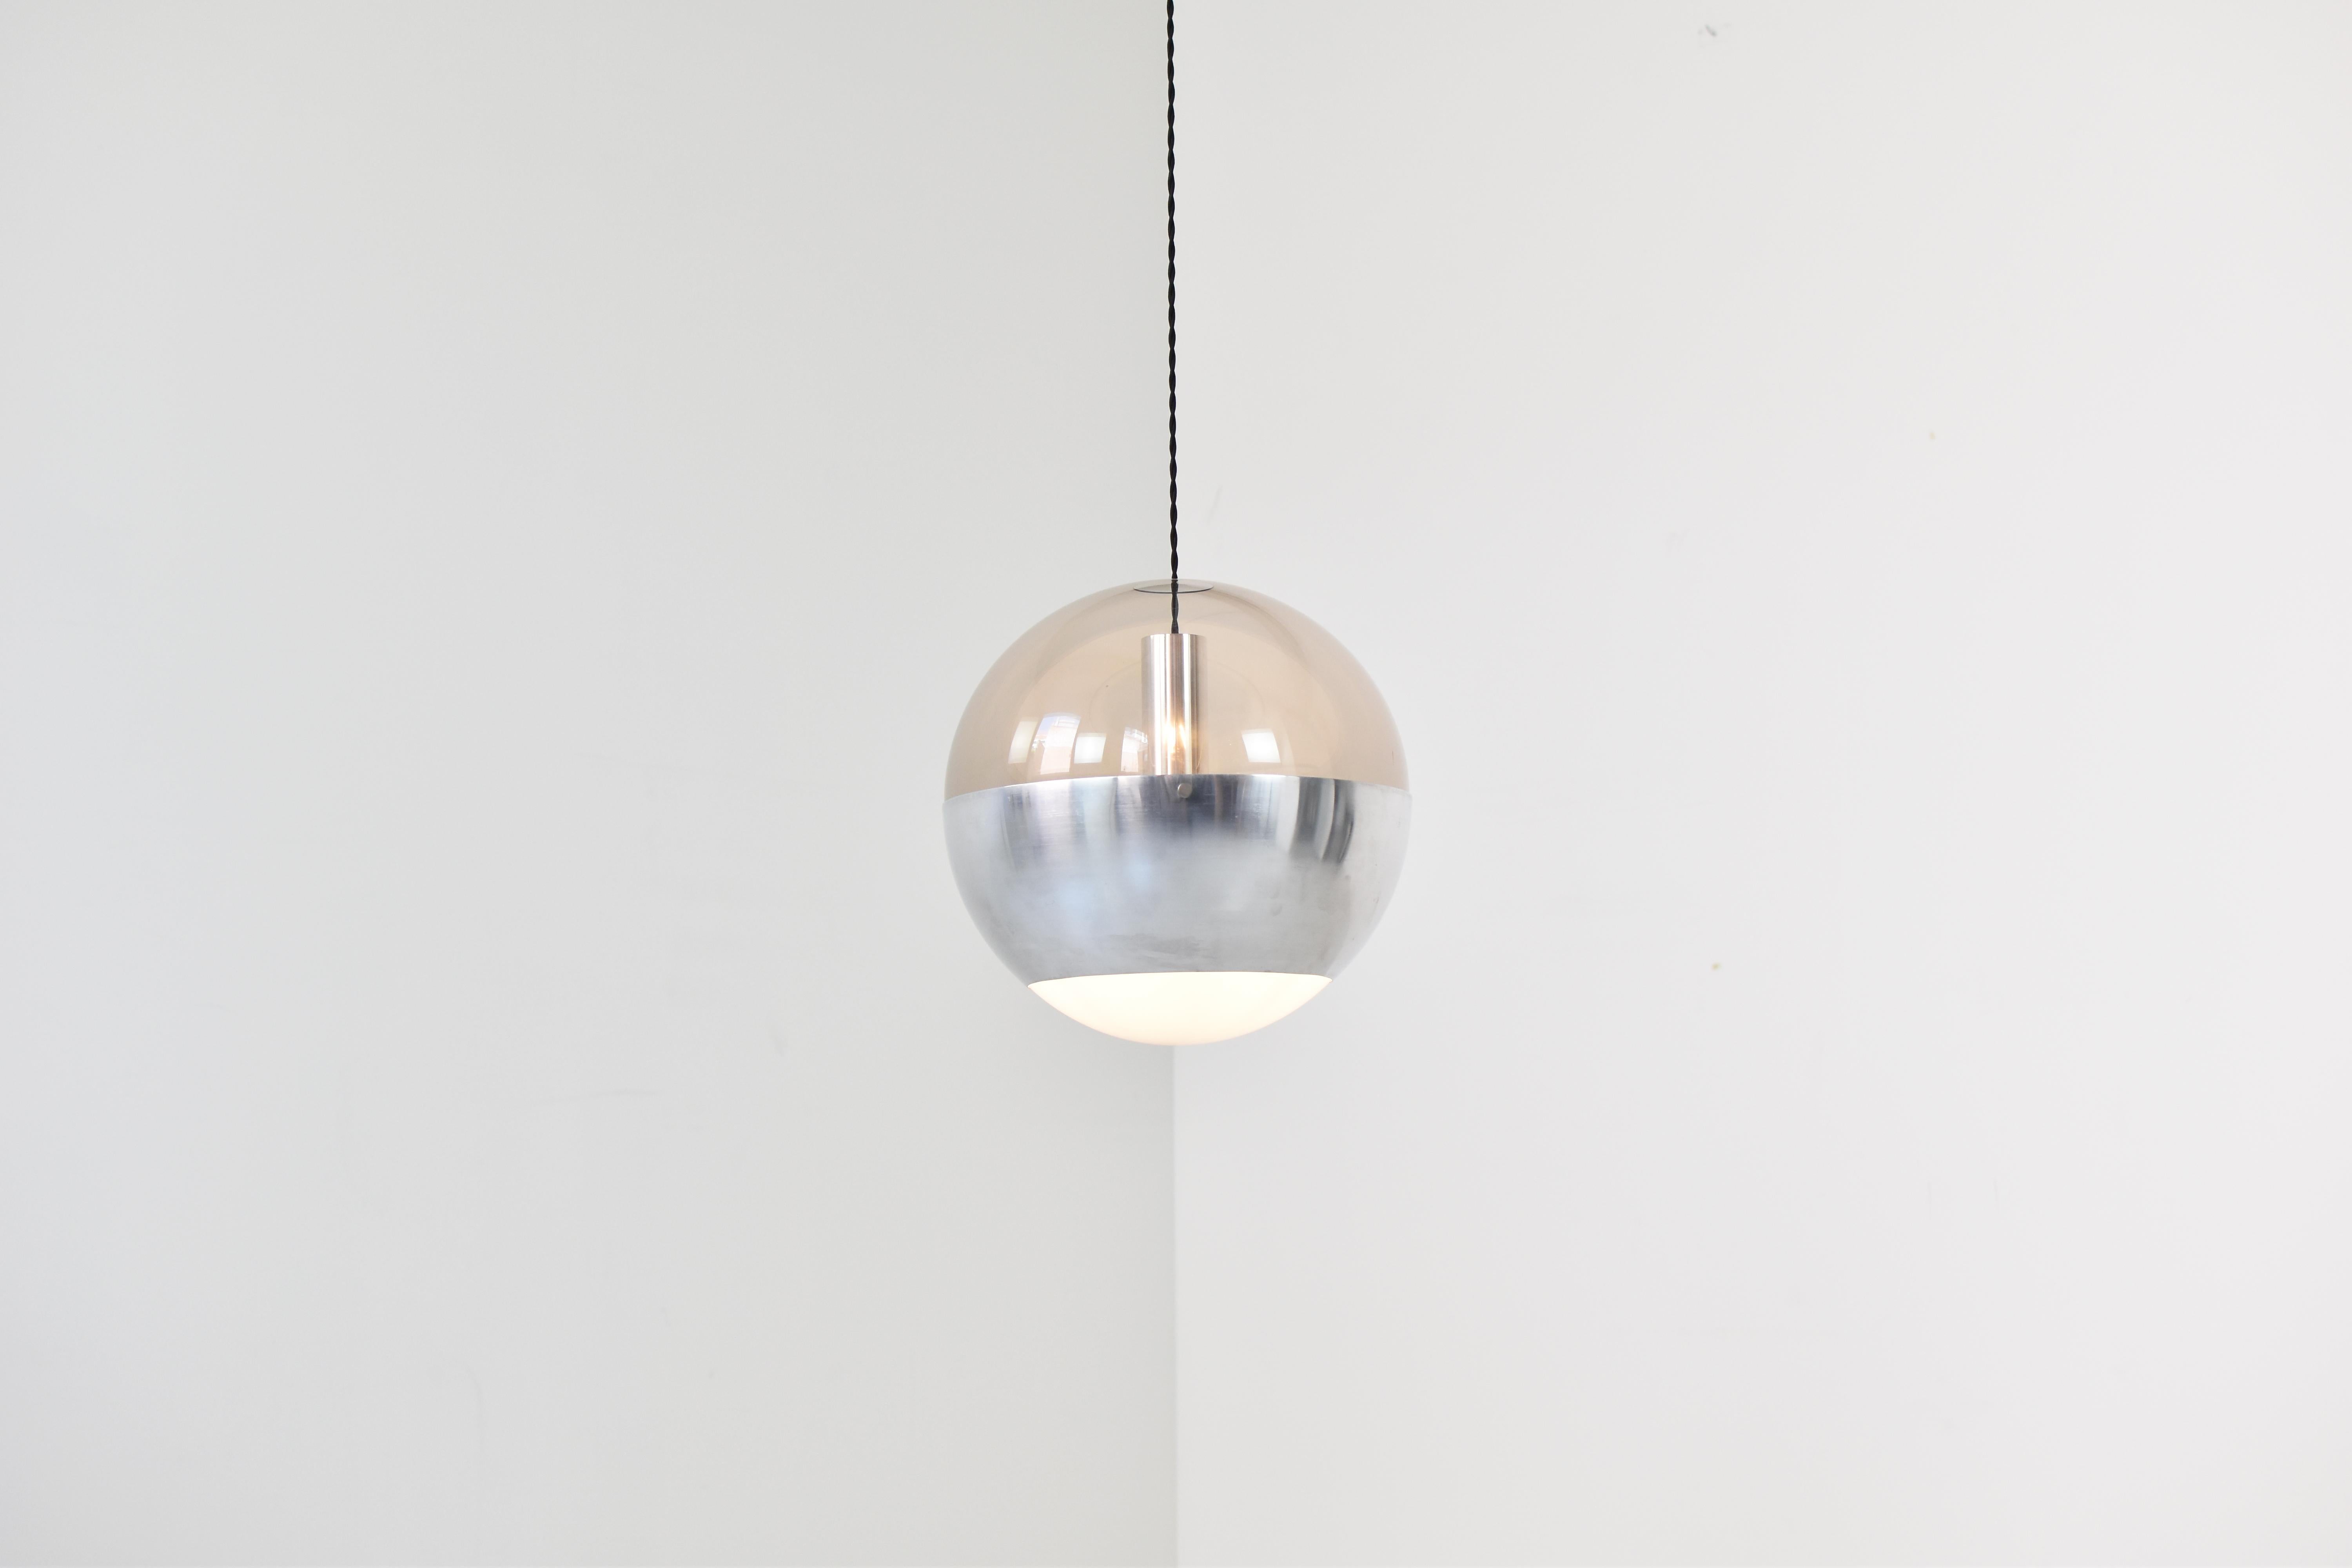 Rare ‘Luna’ pendant by H. Fillekes for Artiforte, The Netherlands 1950s. This lamp features a matted nikkel frame with a perspex hood and a white opaline bottom. Very good original condition.